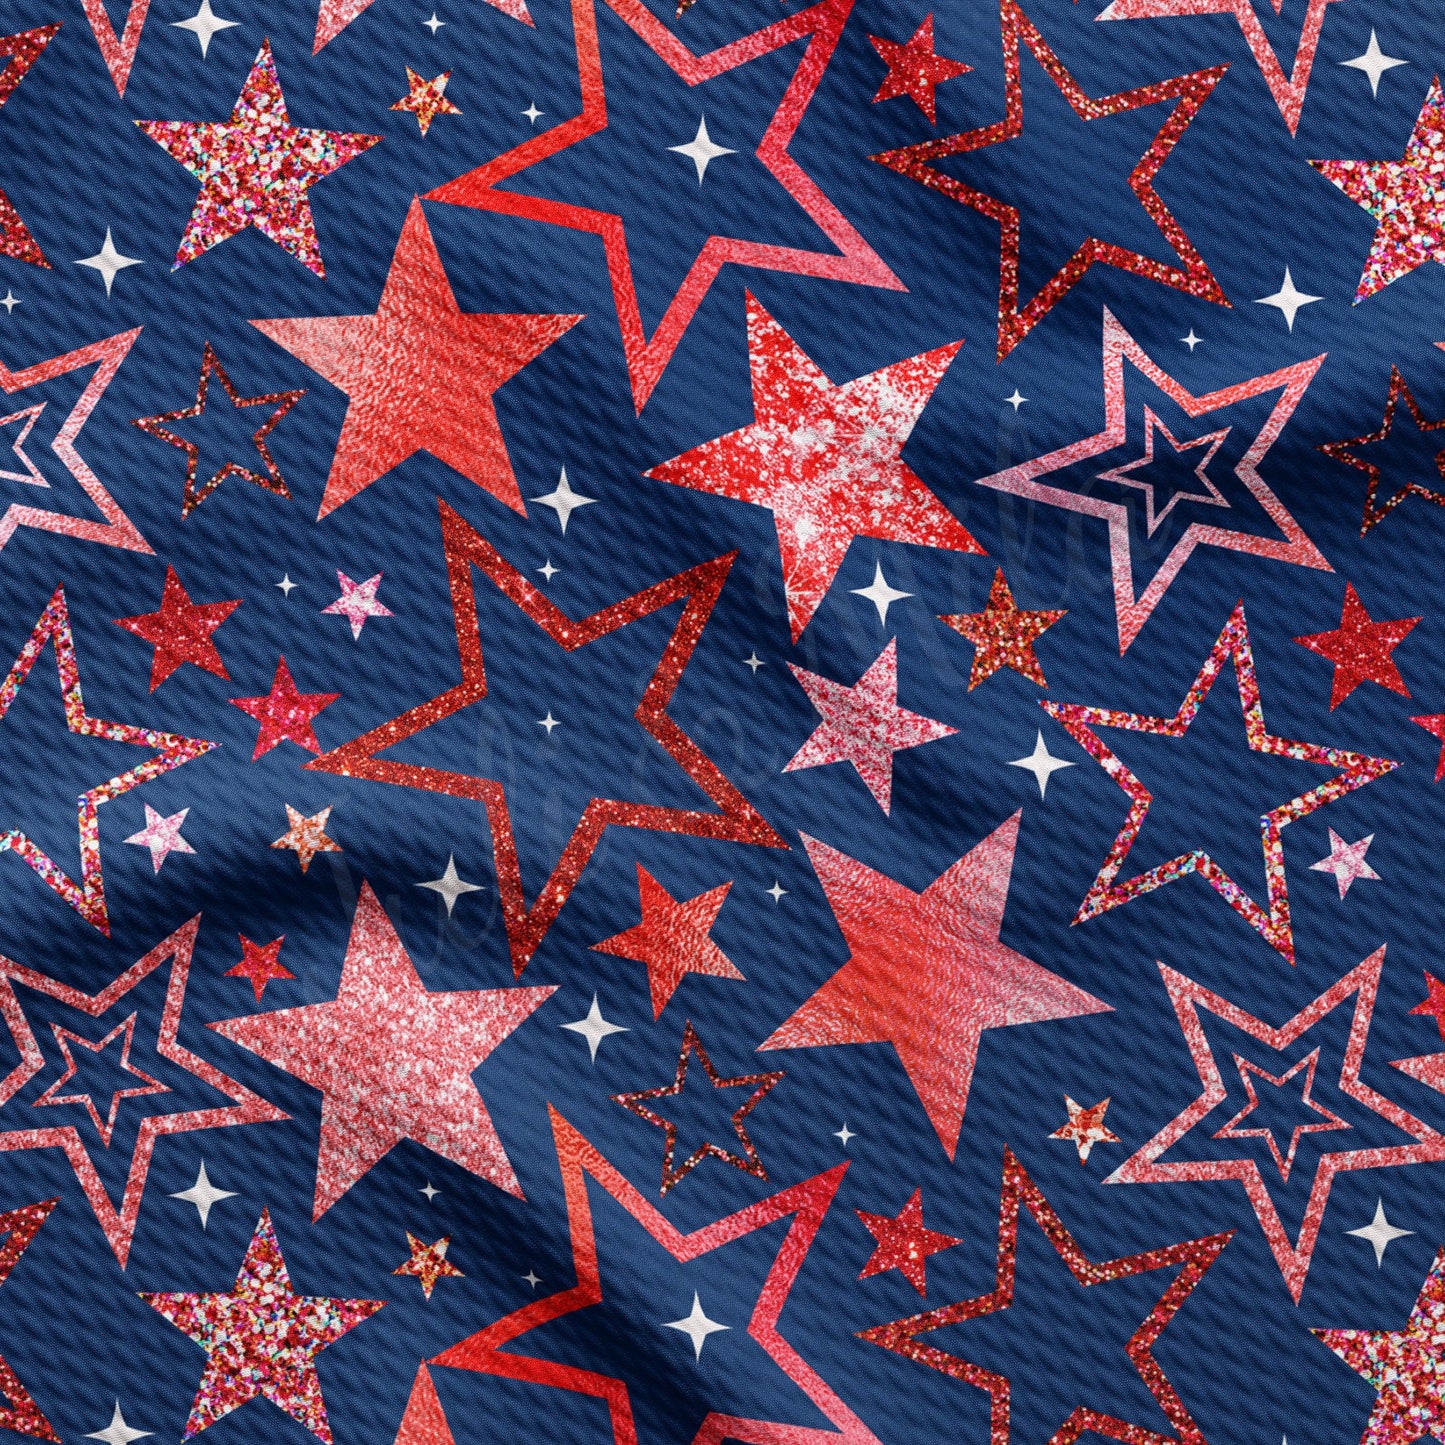 Patriotic 4th of July  Bullet Textured Fabric  AA1715